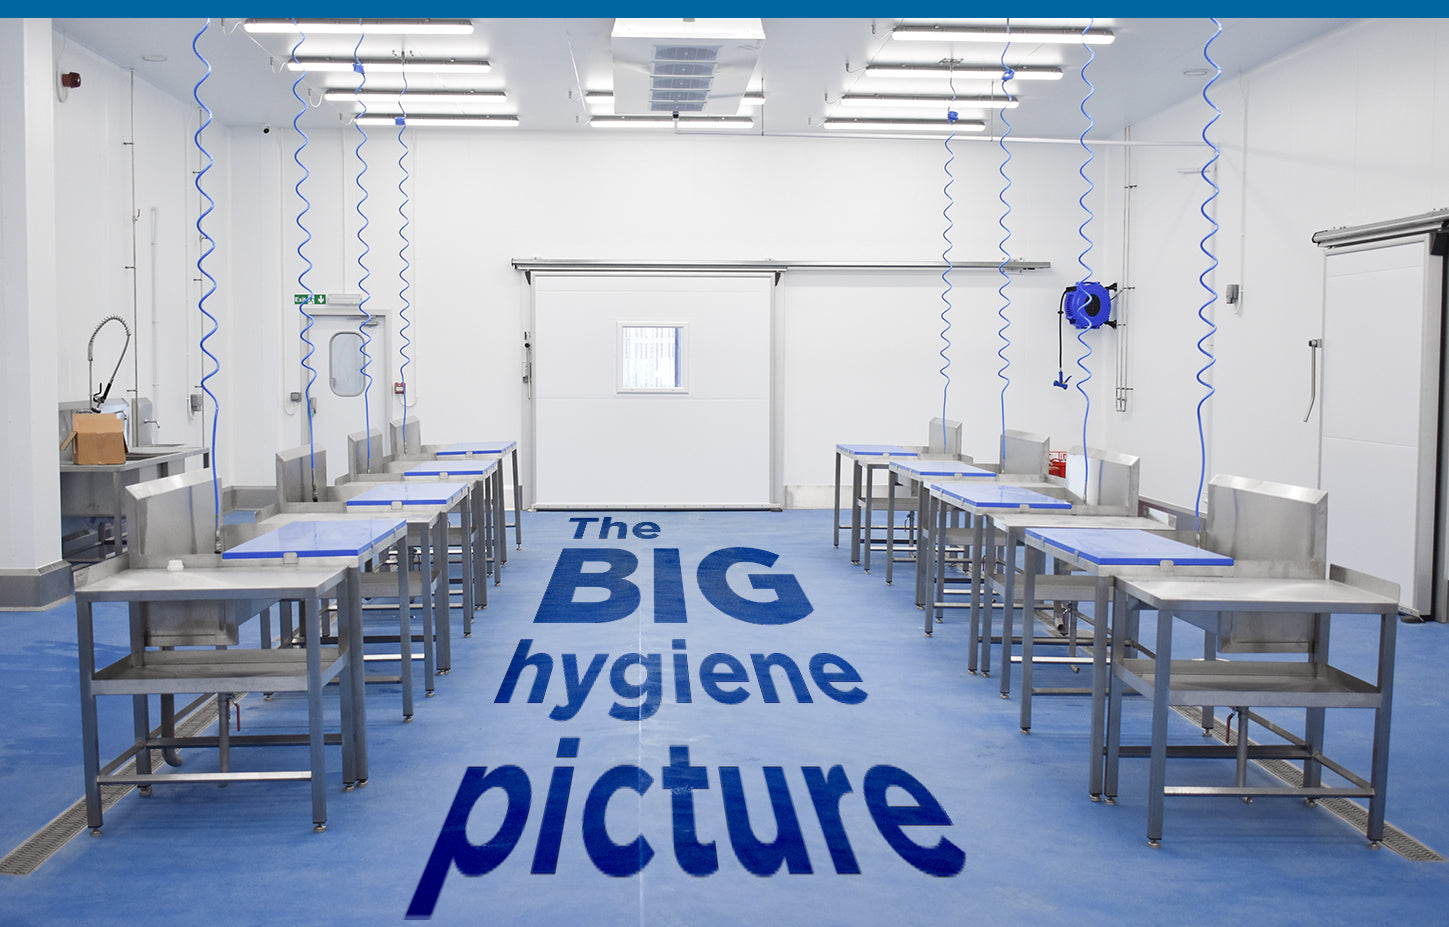 The big hygiene picture